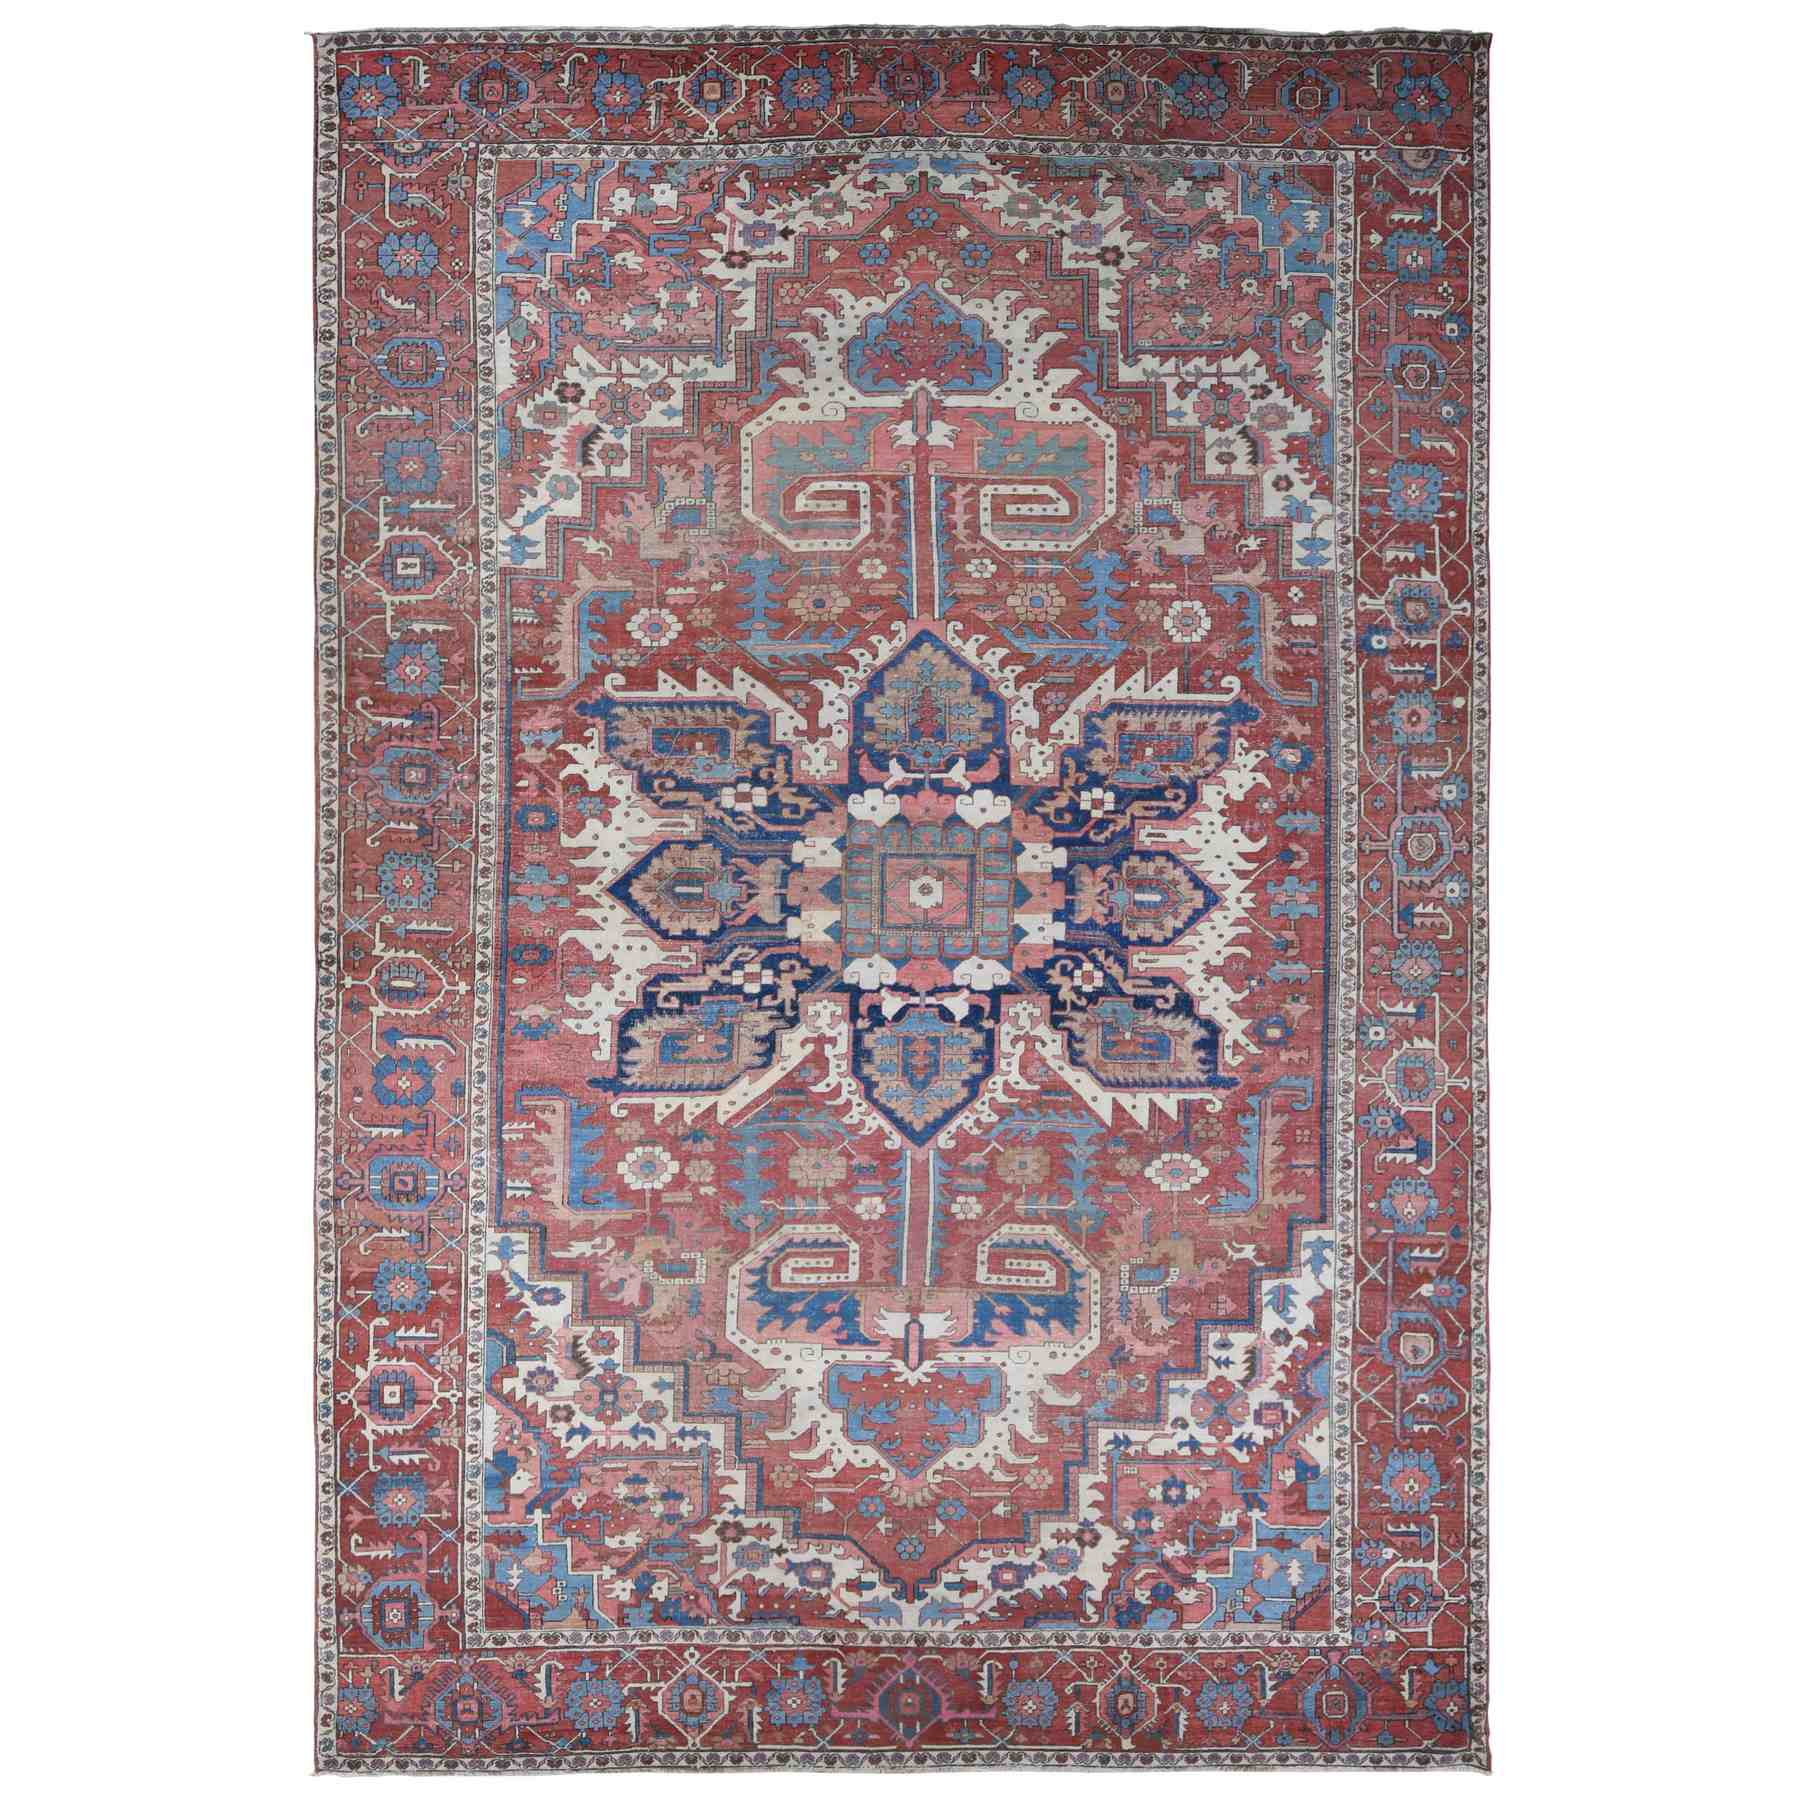 Antique-Hand-Knotted-Rug-403490